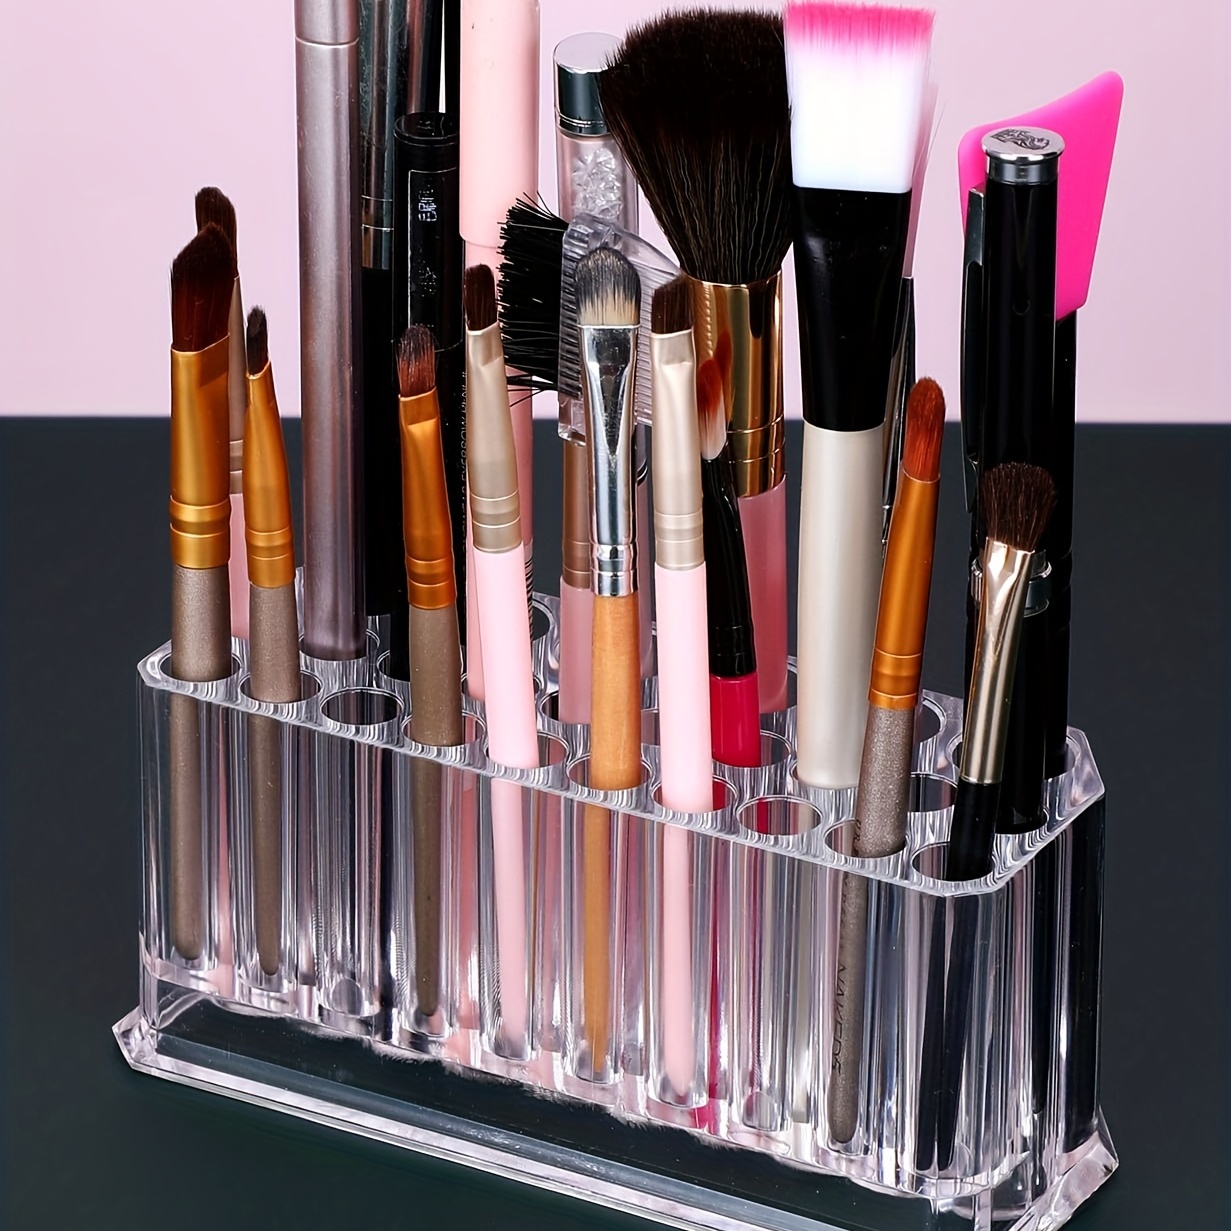 Rotating Makeup Brush Holder Makeup Brush Cup Holder Organizer Make Up  Brush Holder Organizer With lid Clear Acrylic Cover Brush Holder Brush